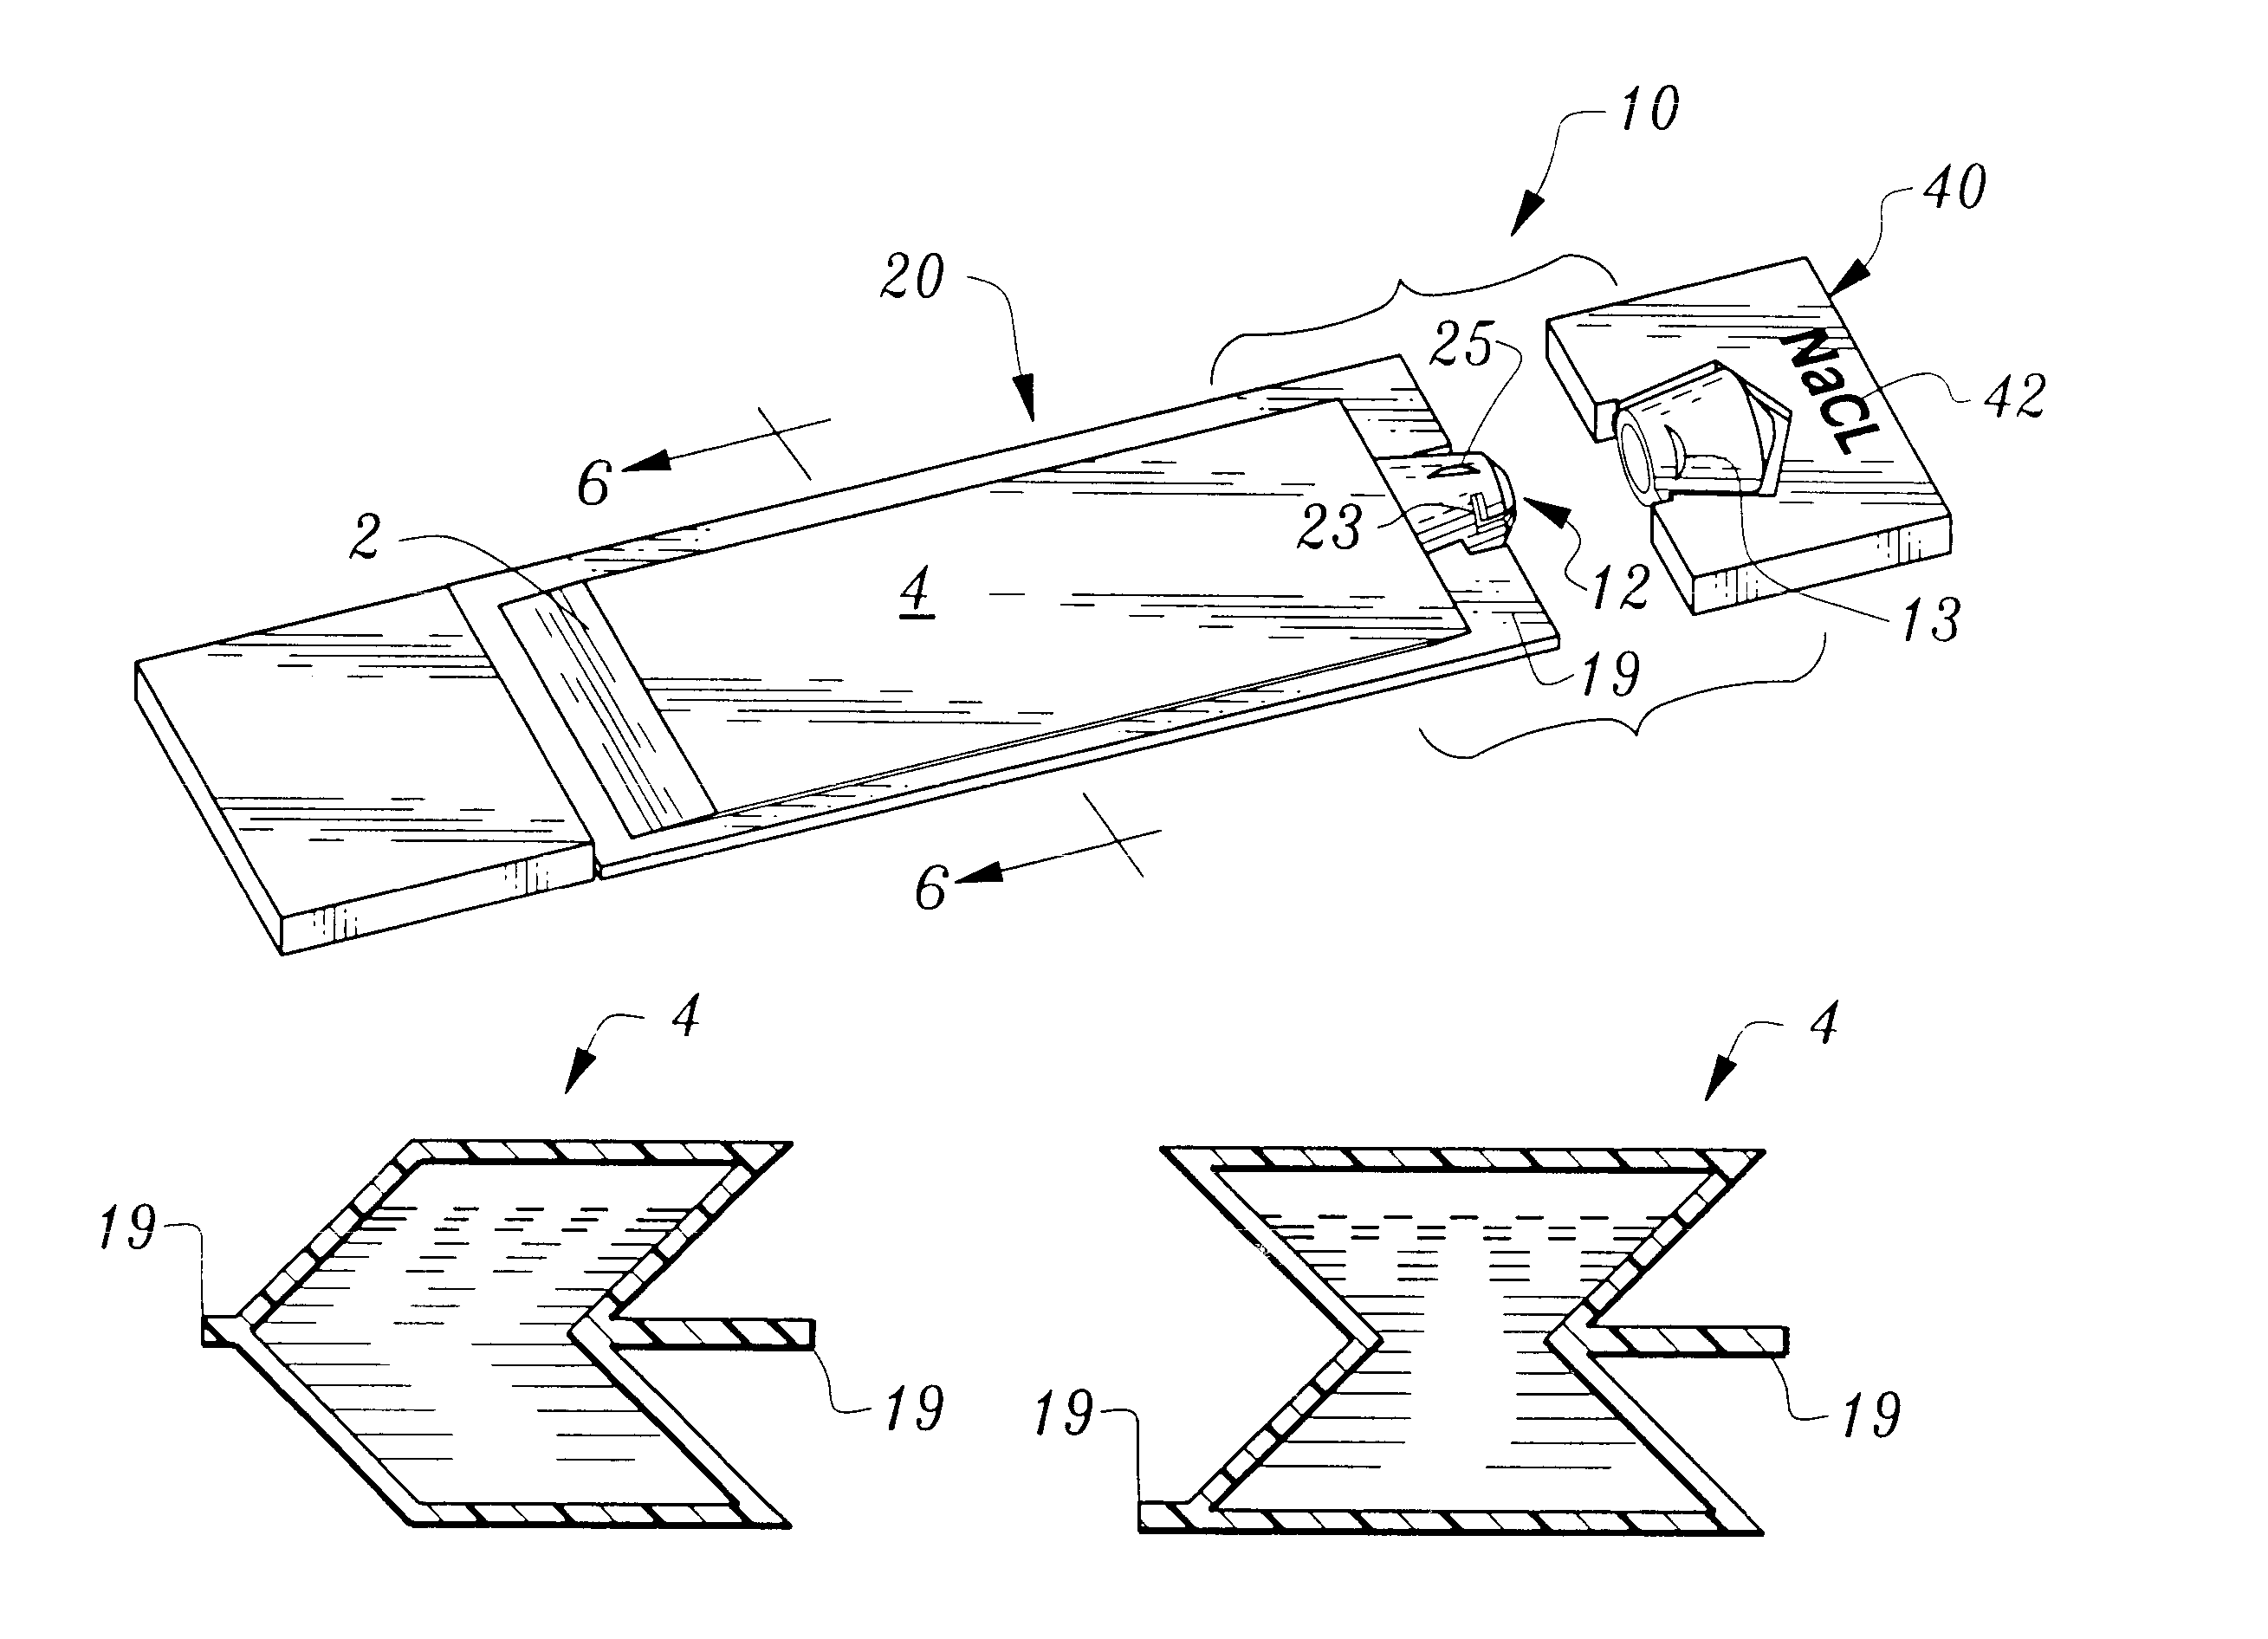 Needleless method and apparatus for transferring liquid from a container to an injecting device without ambient air contamination